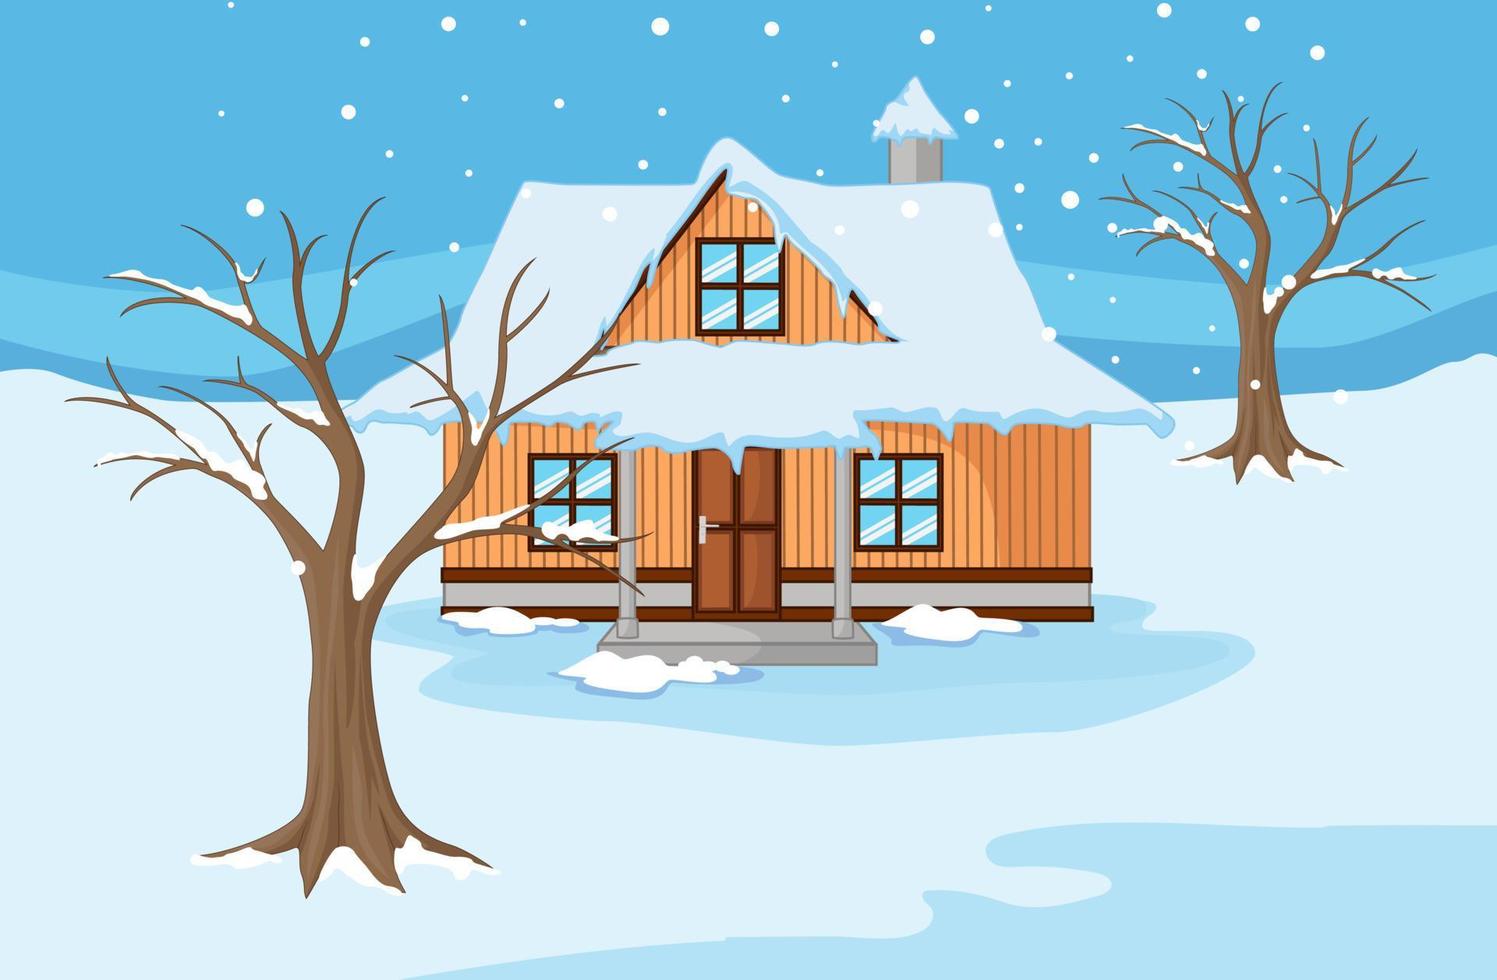 Winter landscape with house and trees vector